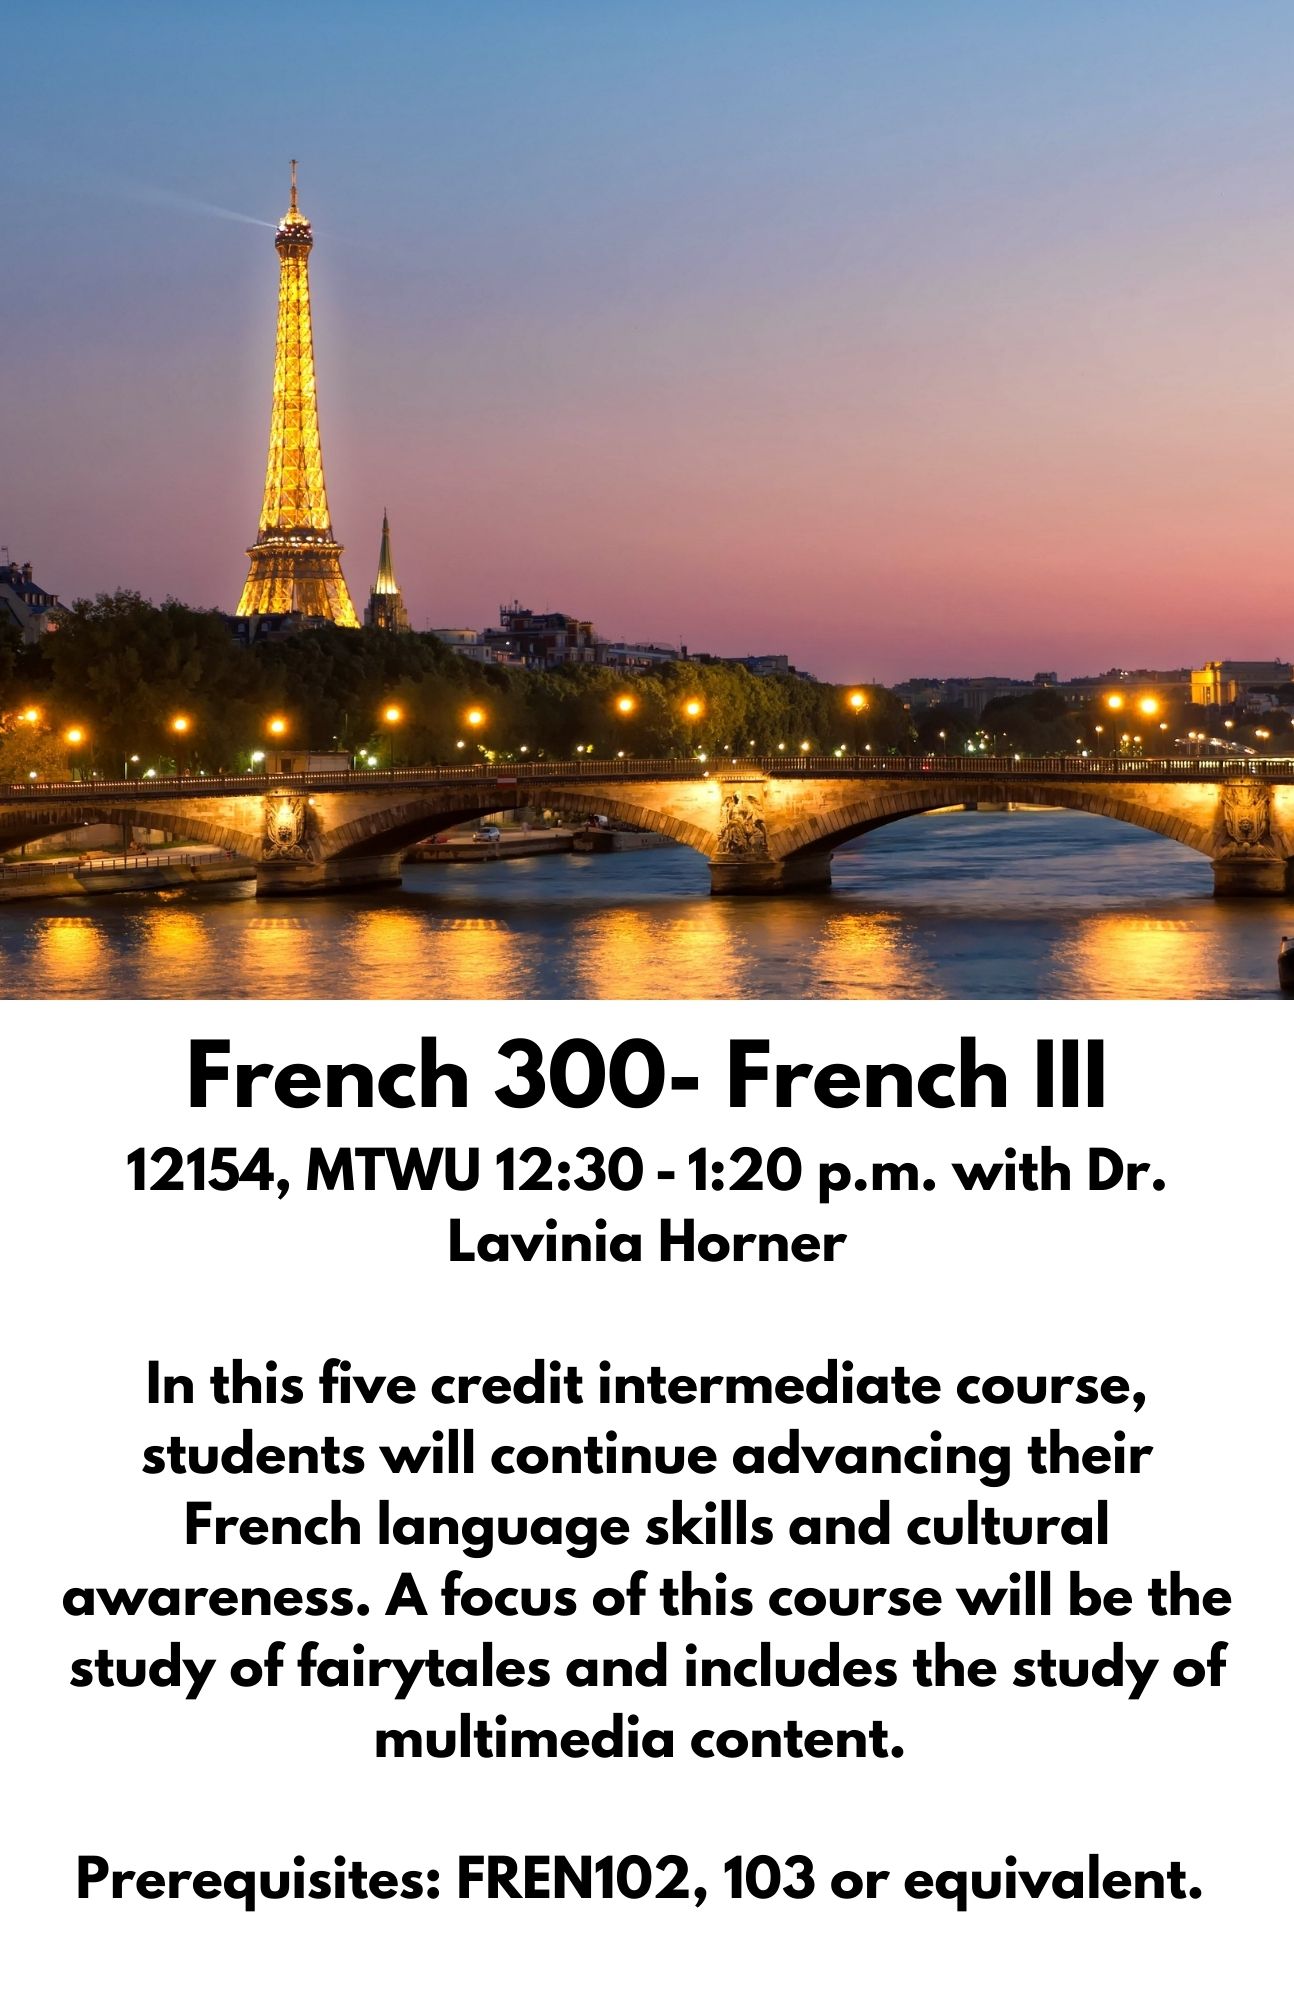 French 300- French III 12154, MTWU 12:30 - 1:20 p.m. with Dr. Lavinia Horner  In this five credit intermediate course, students will continue advancing their French language skills and cultural awareness. A focus of this course will be the study of fairytales and includes the study of multimedia content.   Prerequisites: FREN102, 103 or equivalent. 